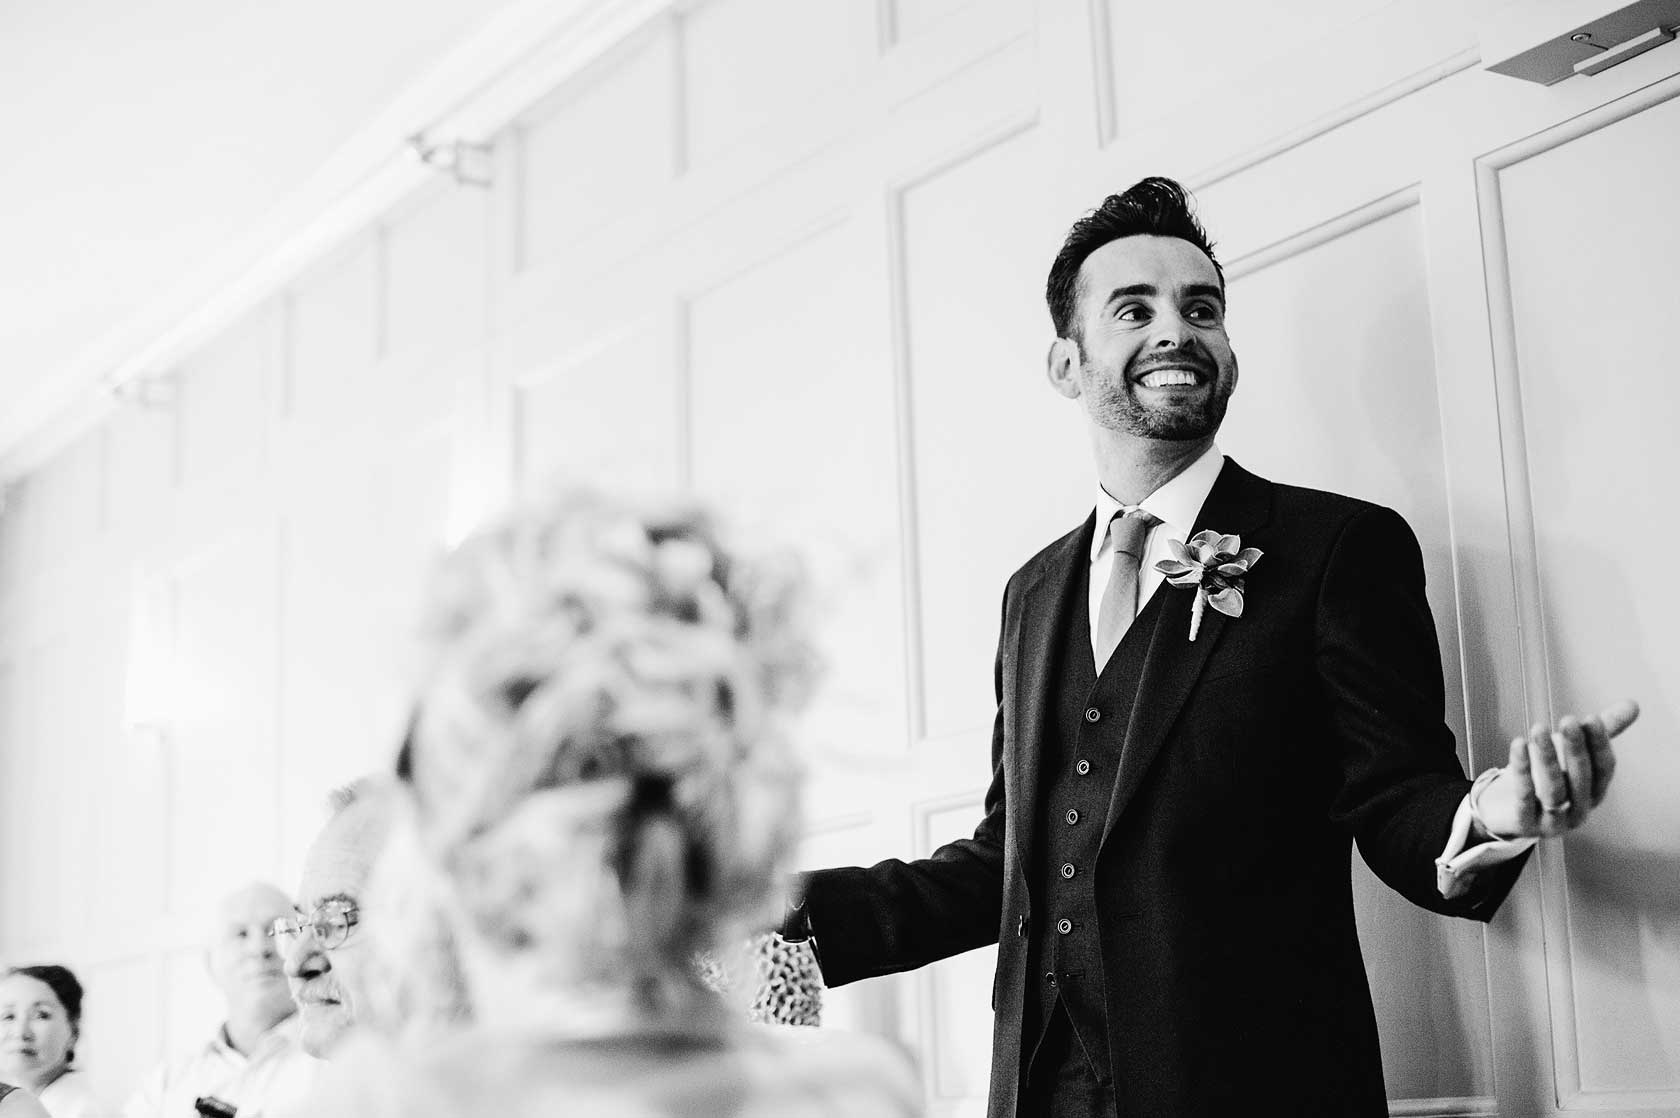 Reportage Wedding Photography at a Cotswolds Manor House